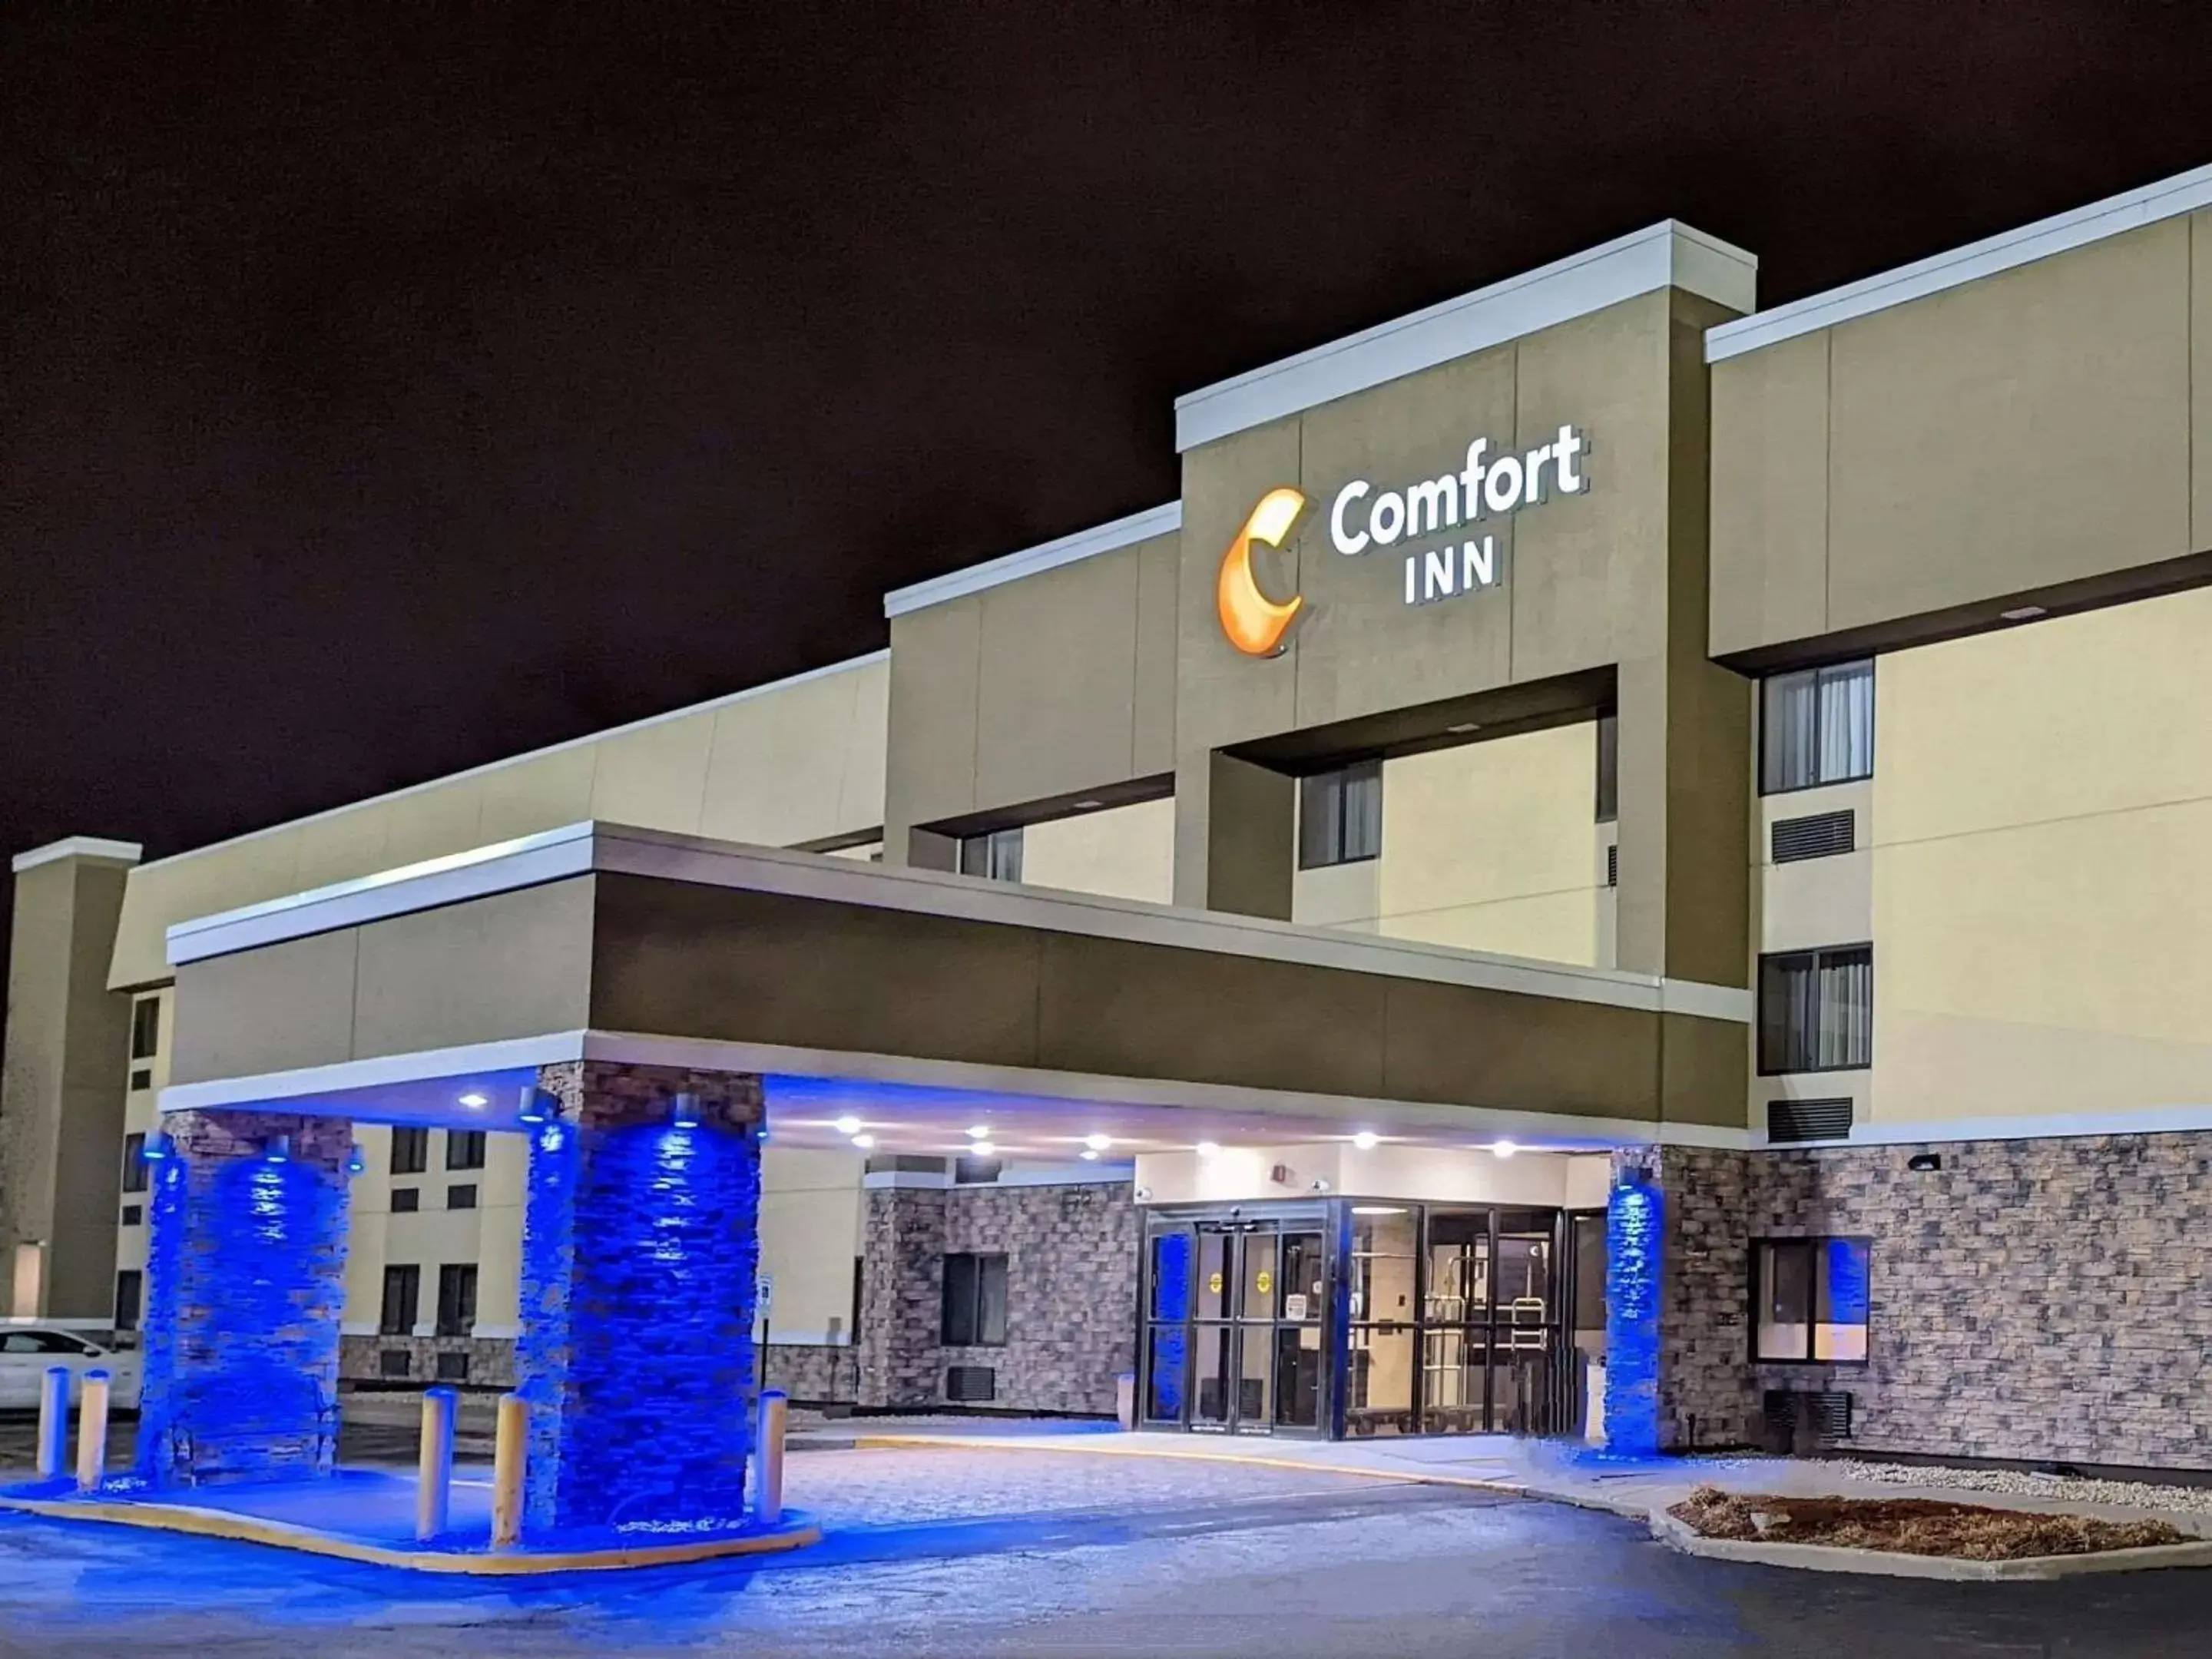 Property Building in Comfort Inn Matteson - Chicago